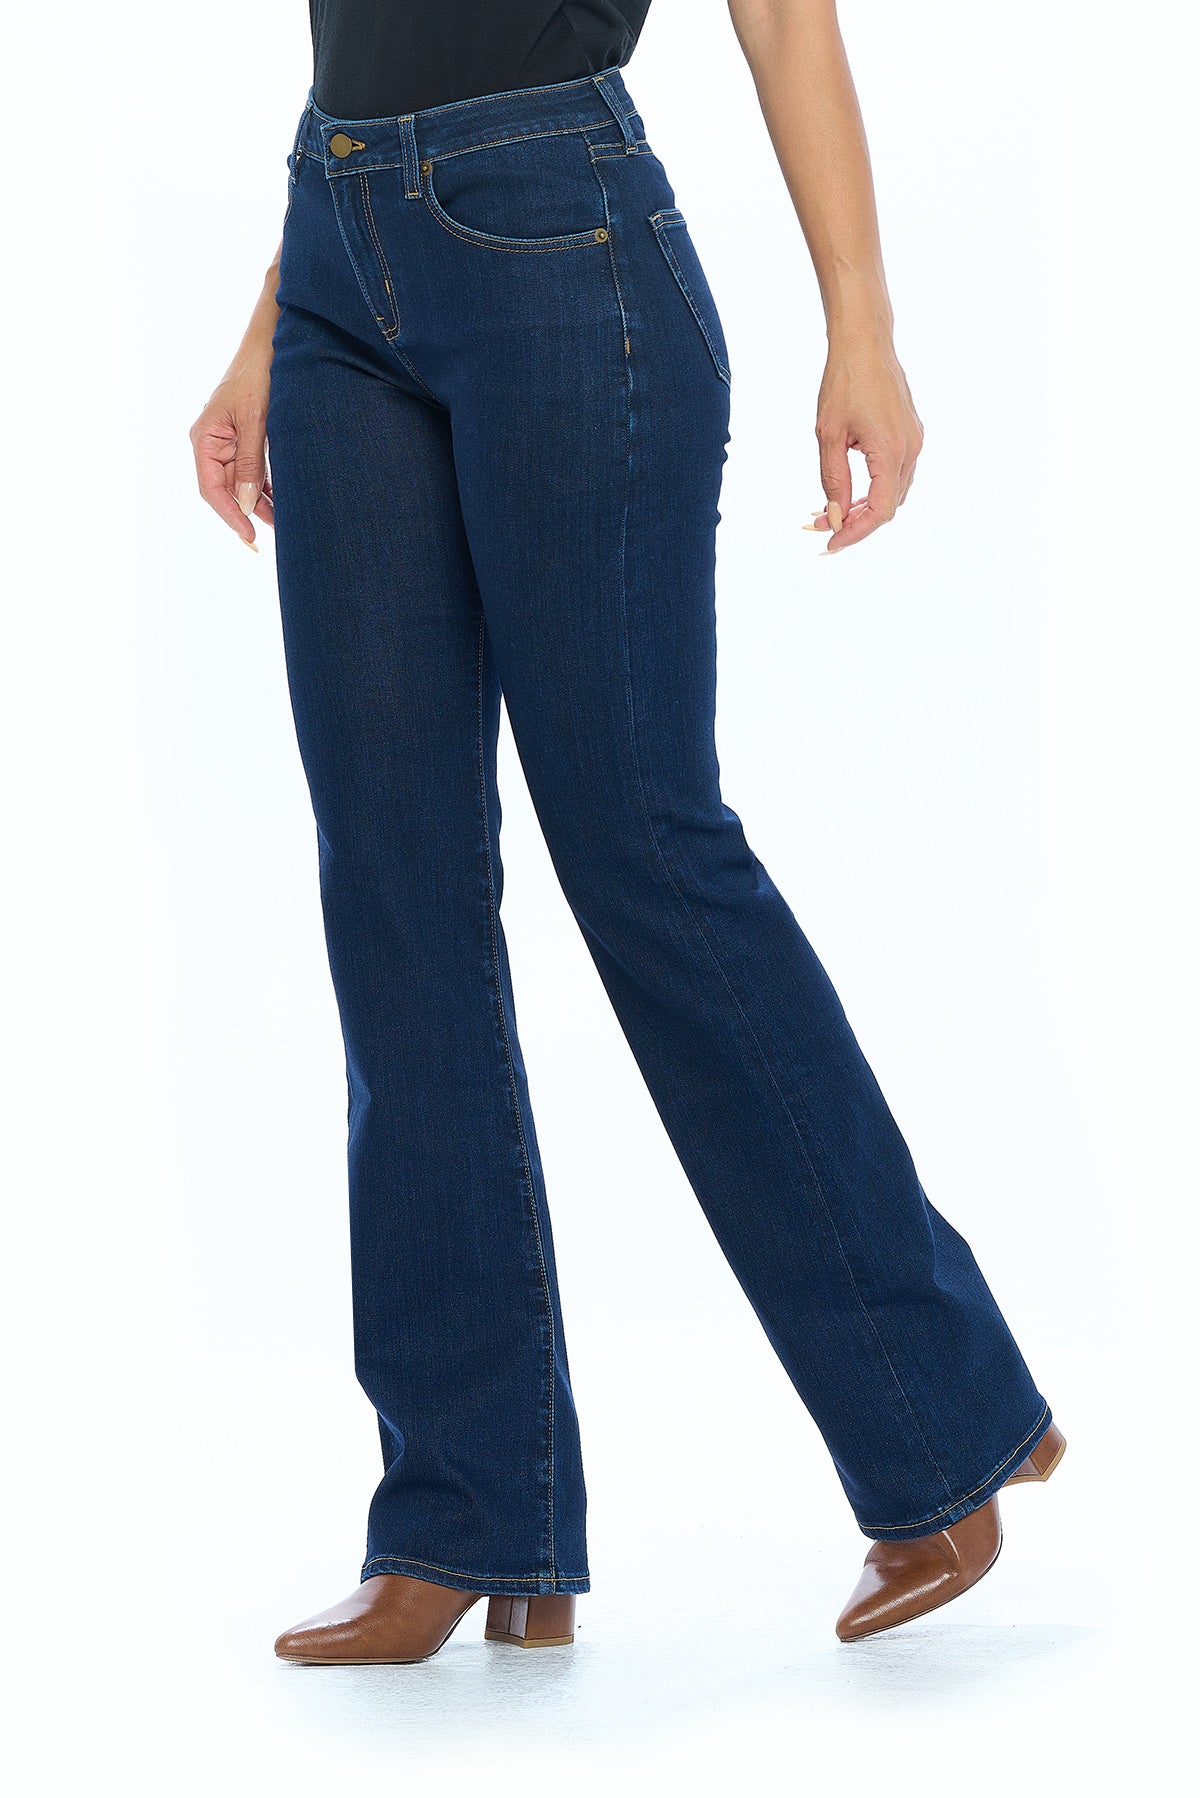 Realsize Womens Stretch Pull On Pants with Pockets India